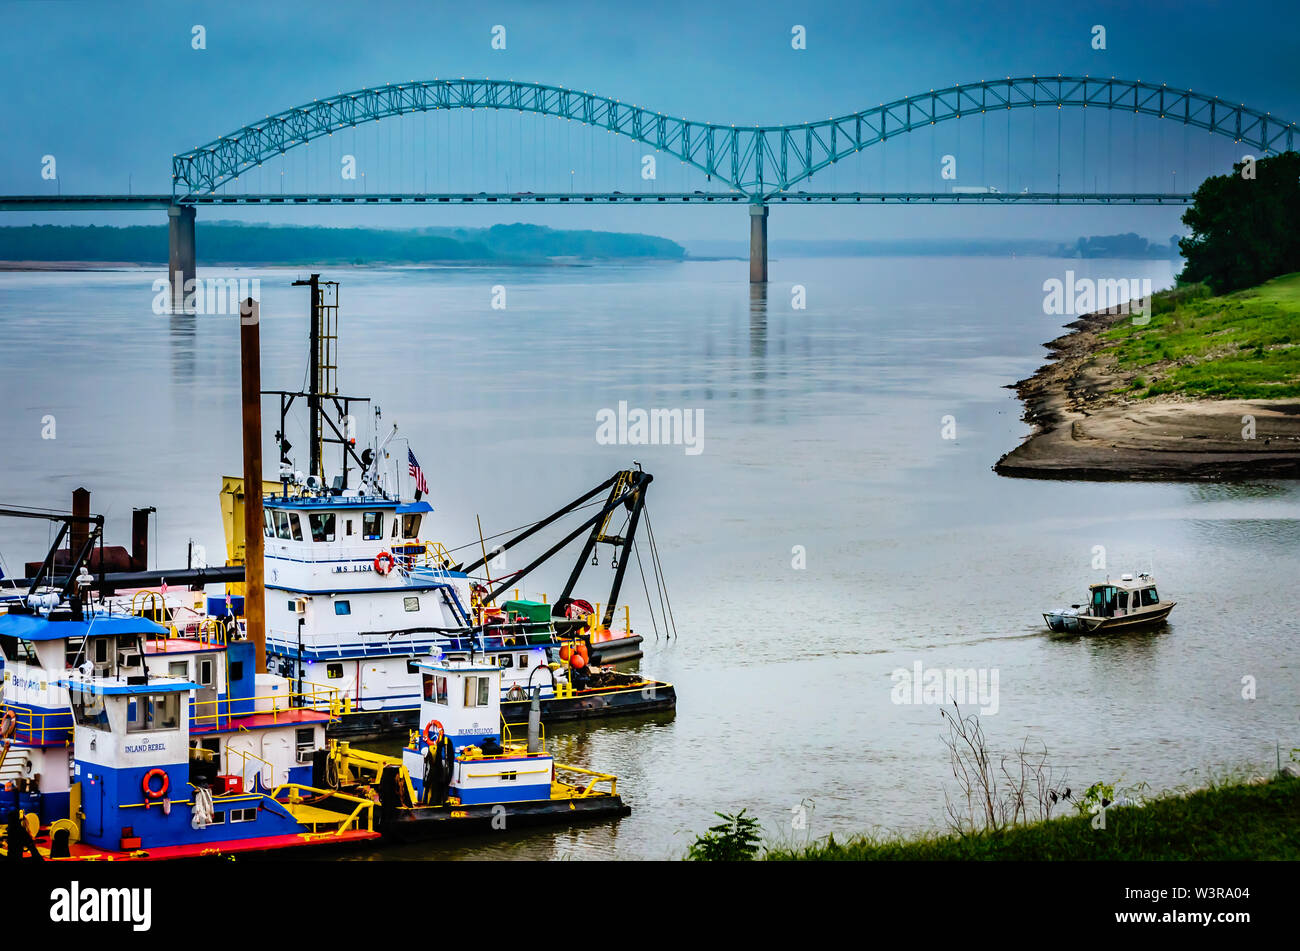 The Hernando de Soto Bridge, also called the M Bridge, is pictured with tug boats, Sept. 10, 2015, in Memphis, Tennessee. Stock Photo